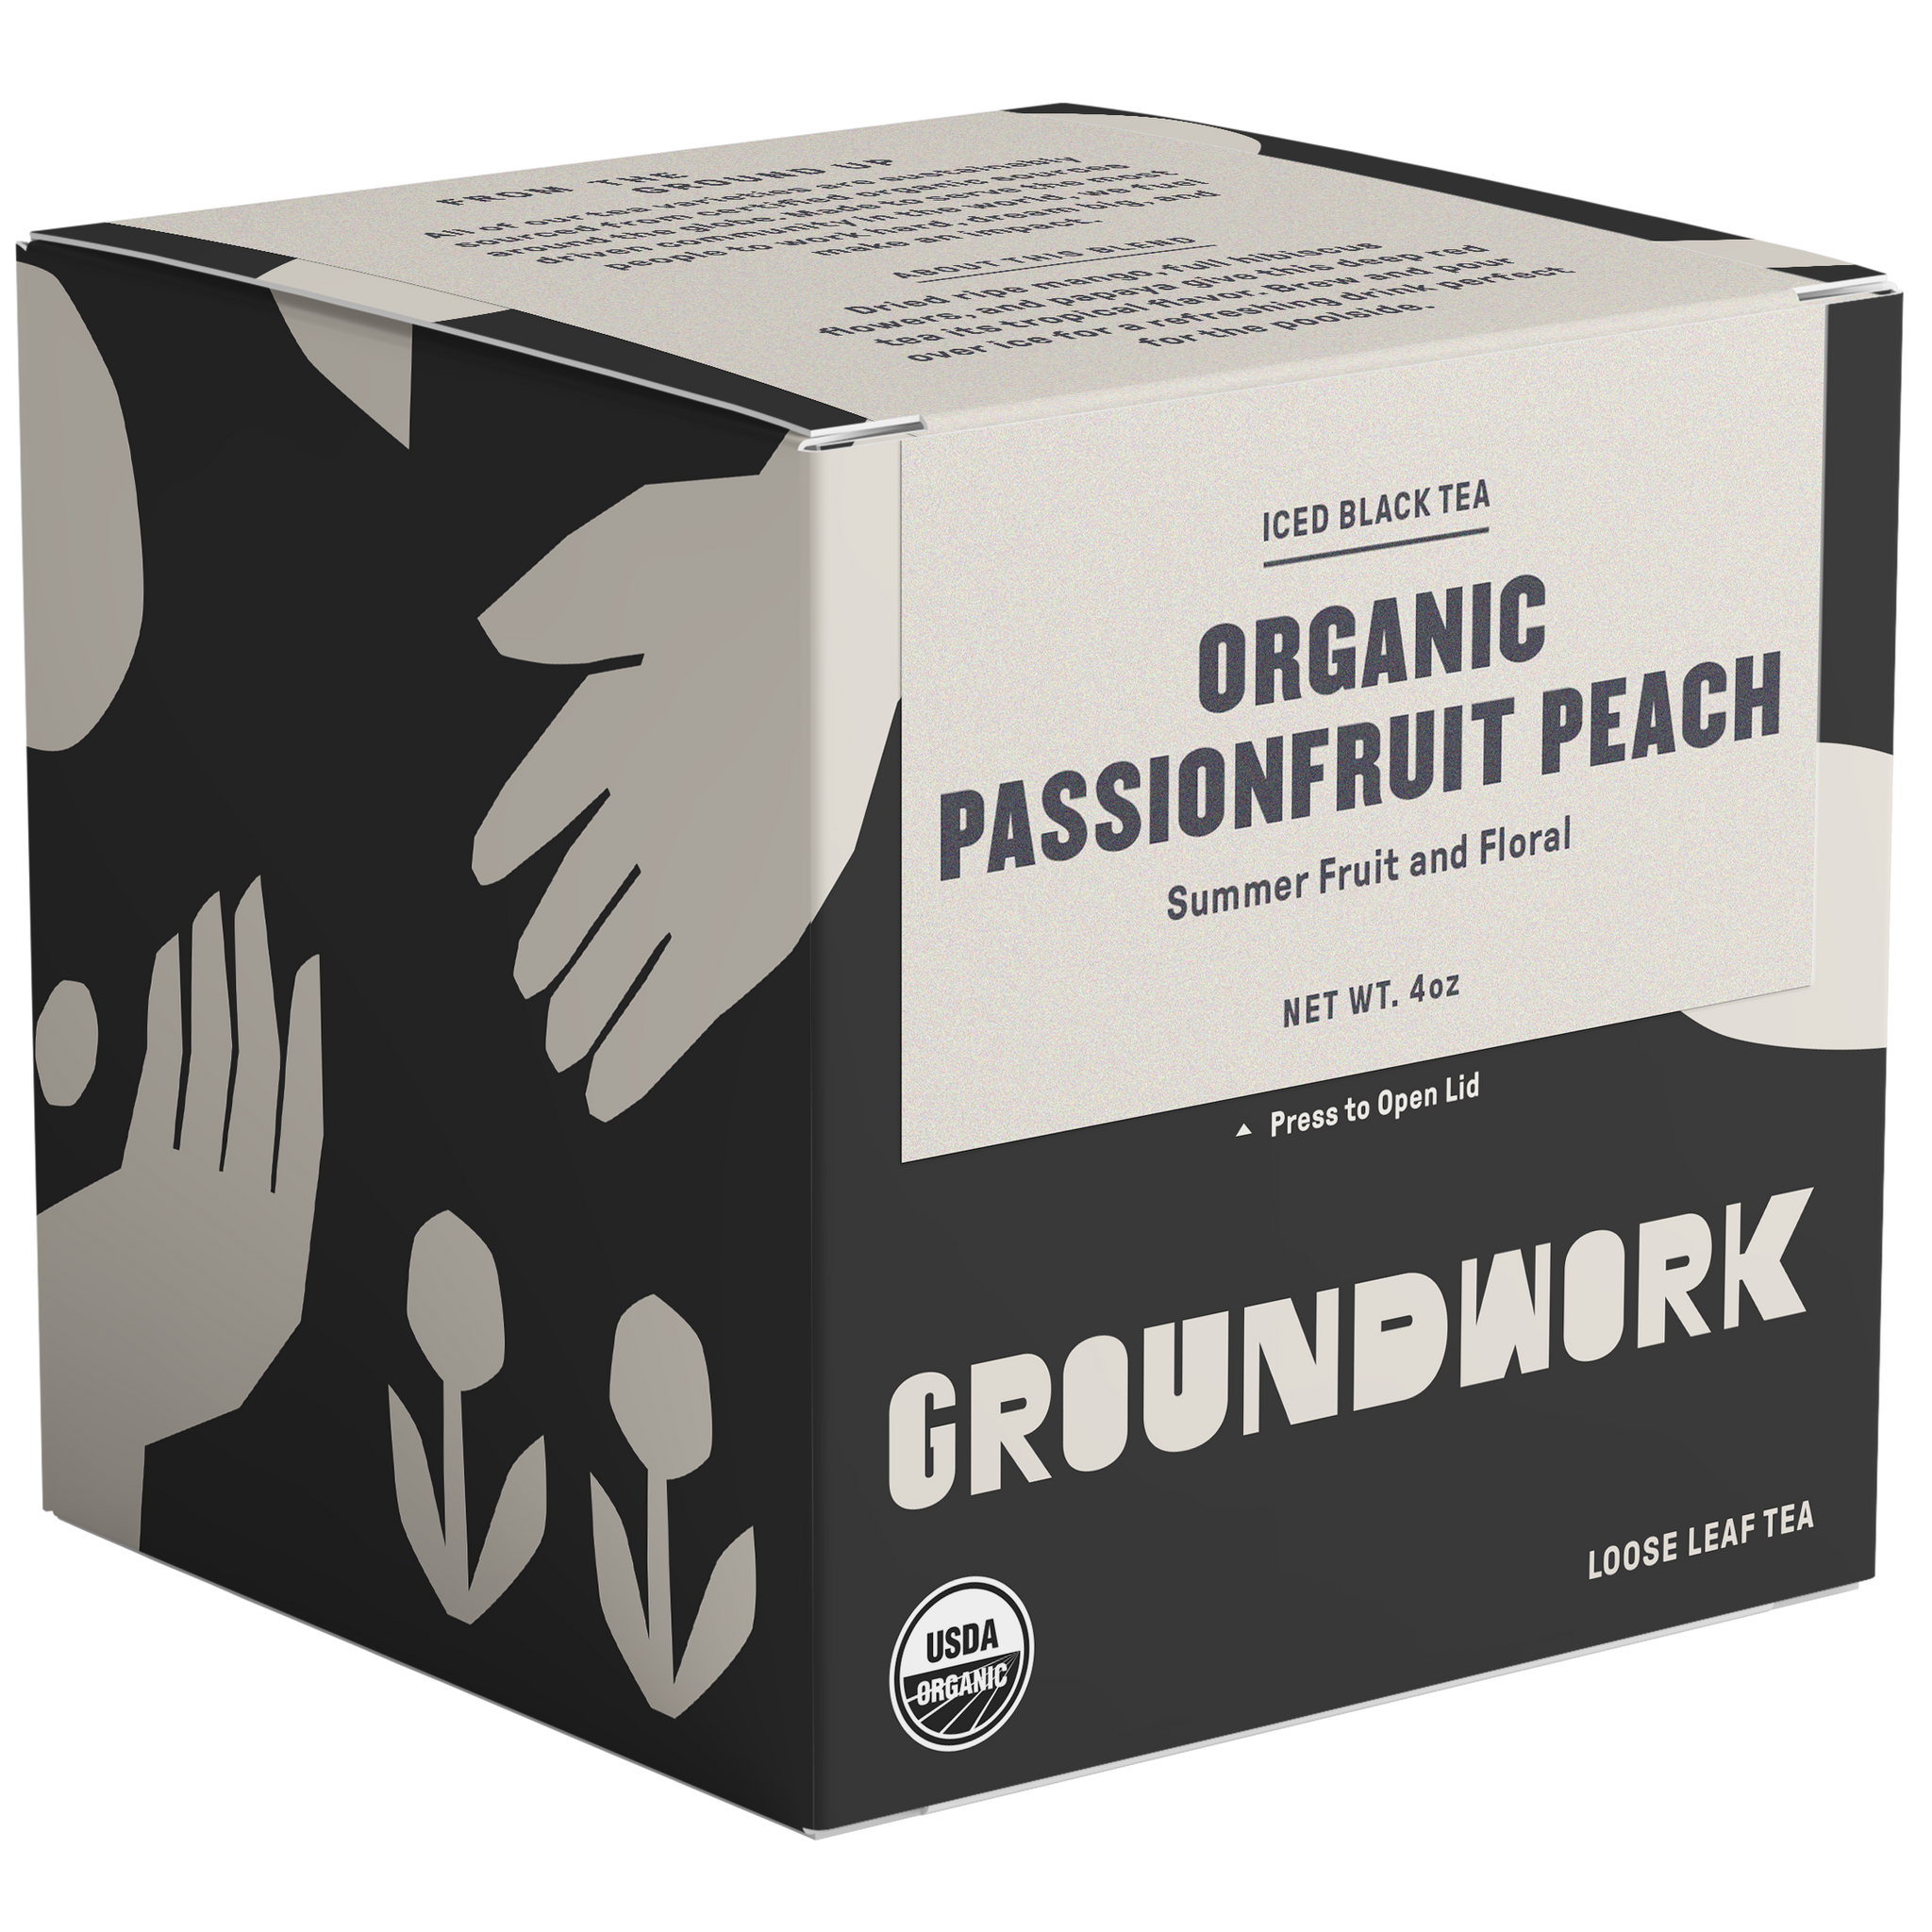 Organic passionfruit peach tea with notes of Summer Fruit and Floral